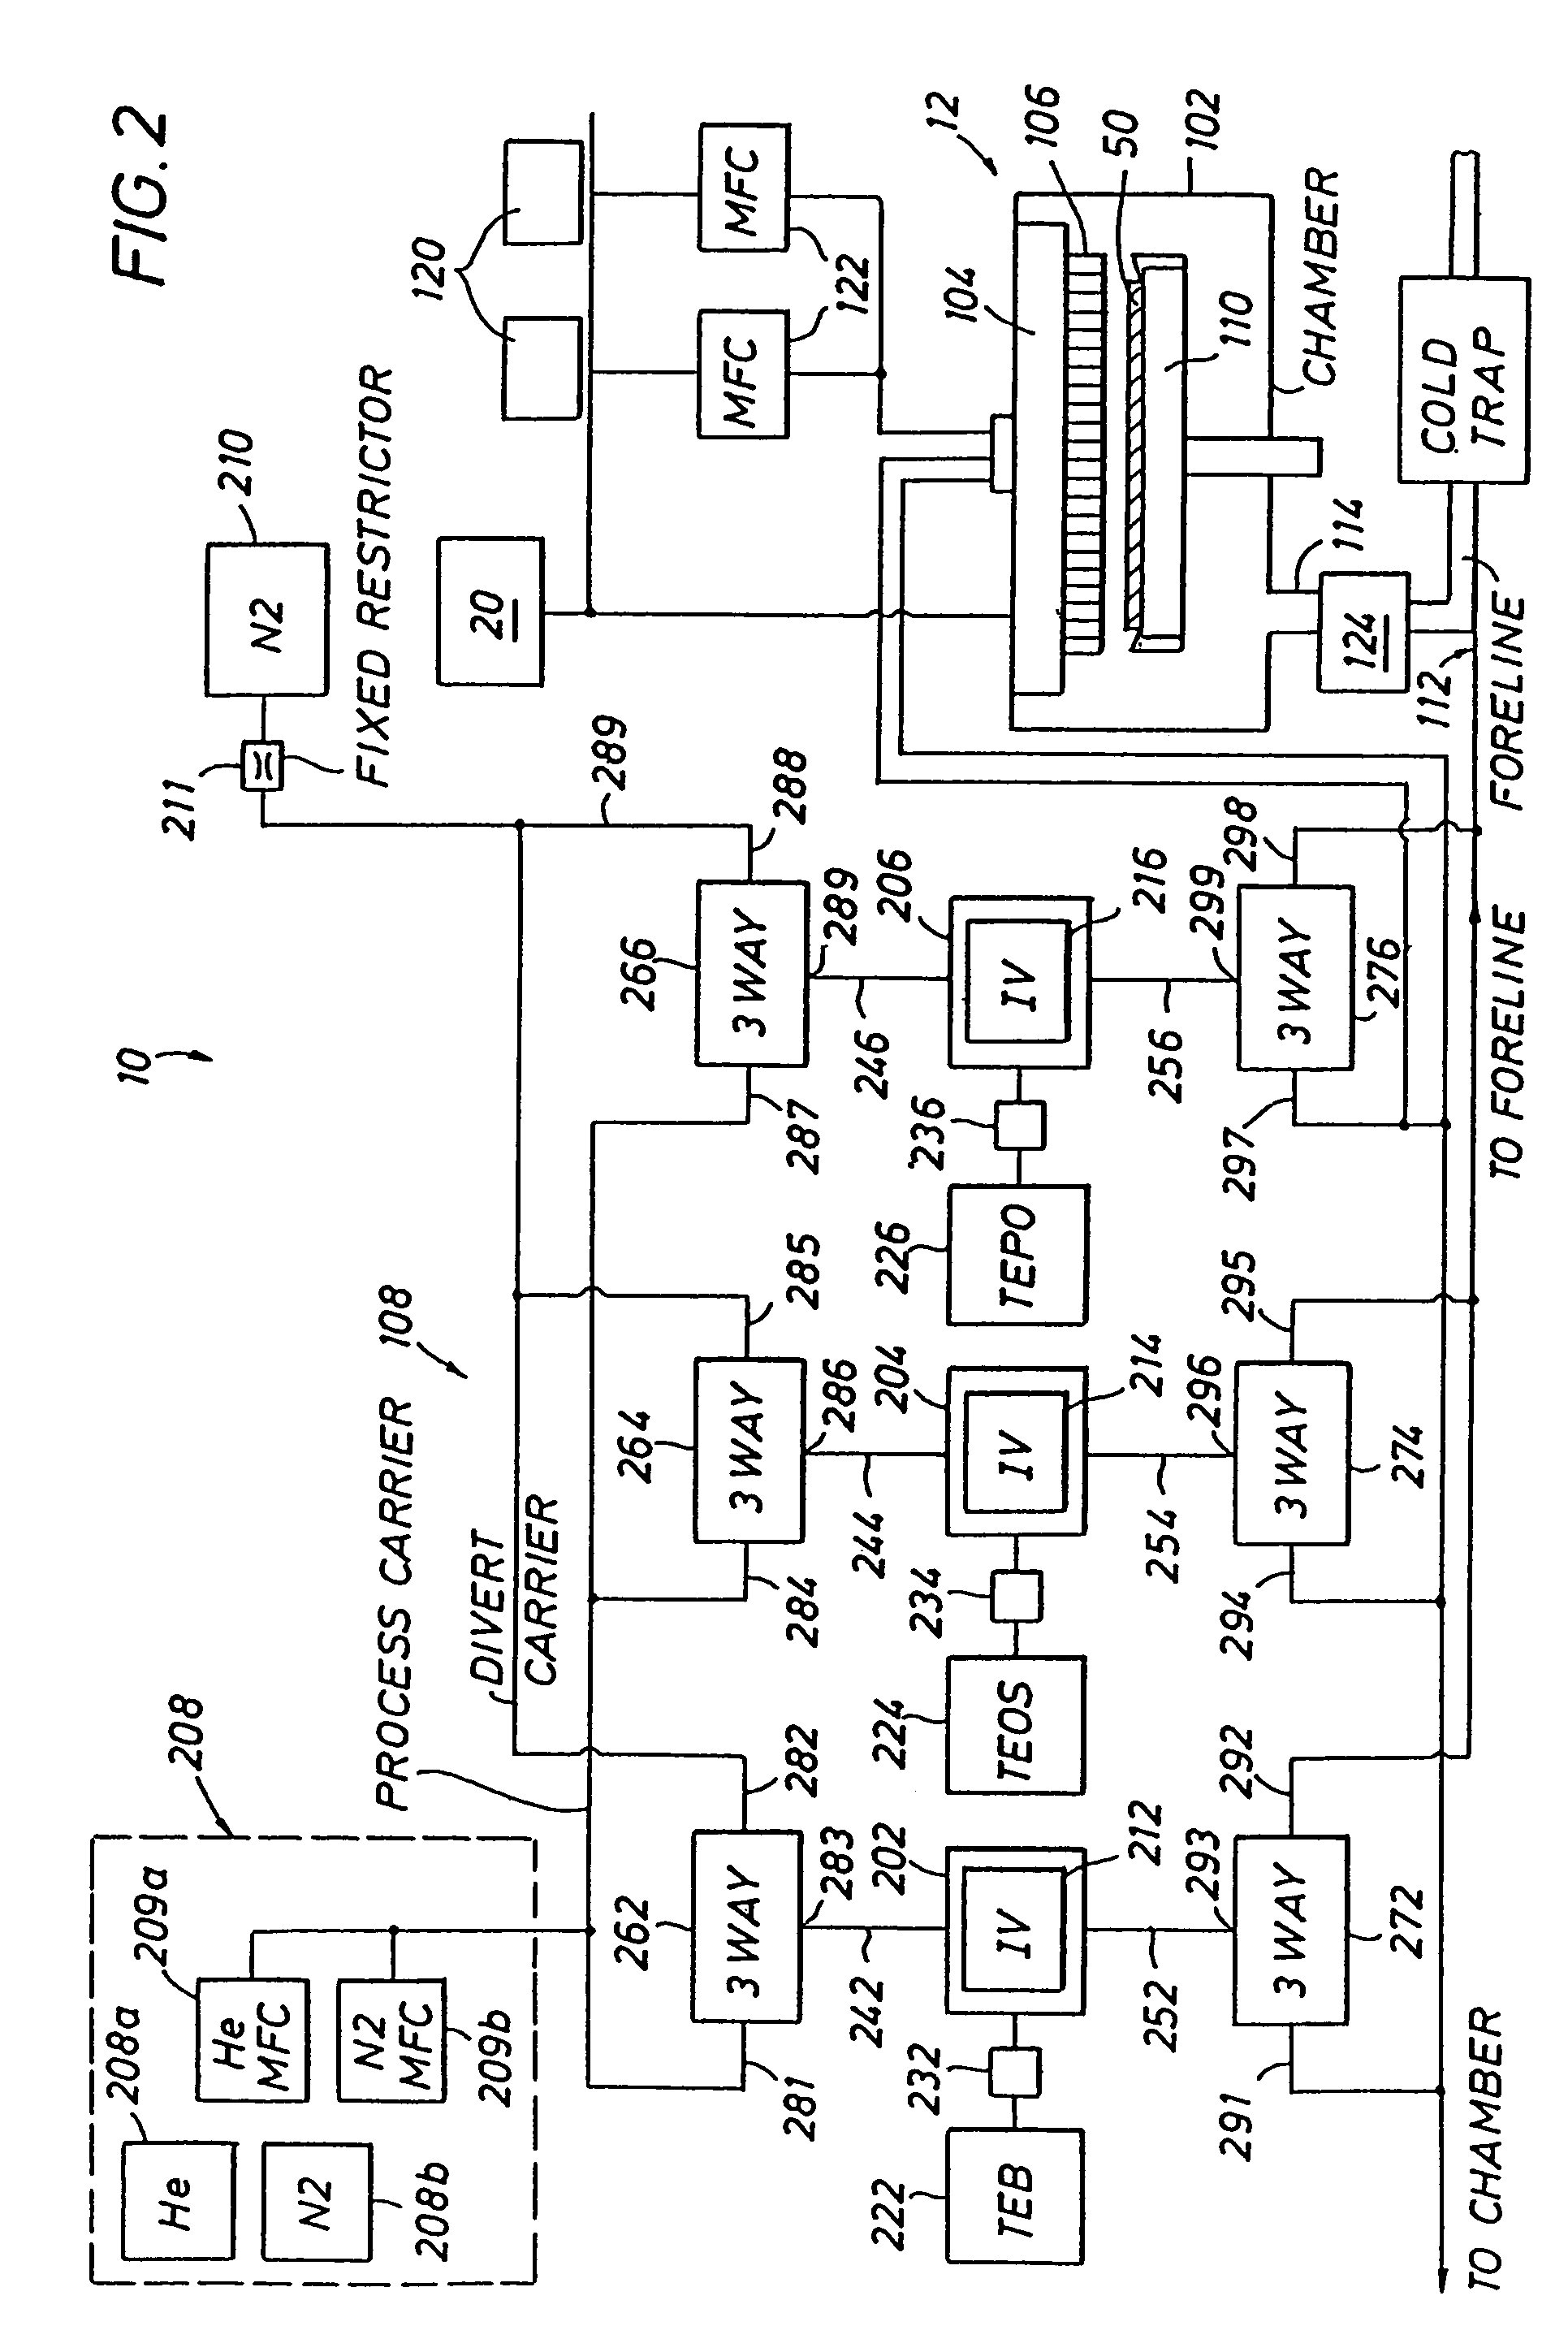 Method and apparatus for controlling dopant concentration during BPSG film deposition to reduce nitride consumption